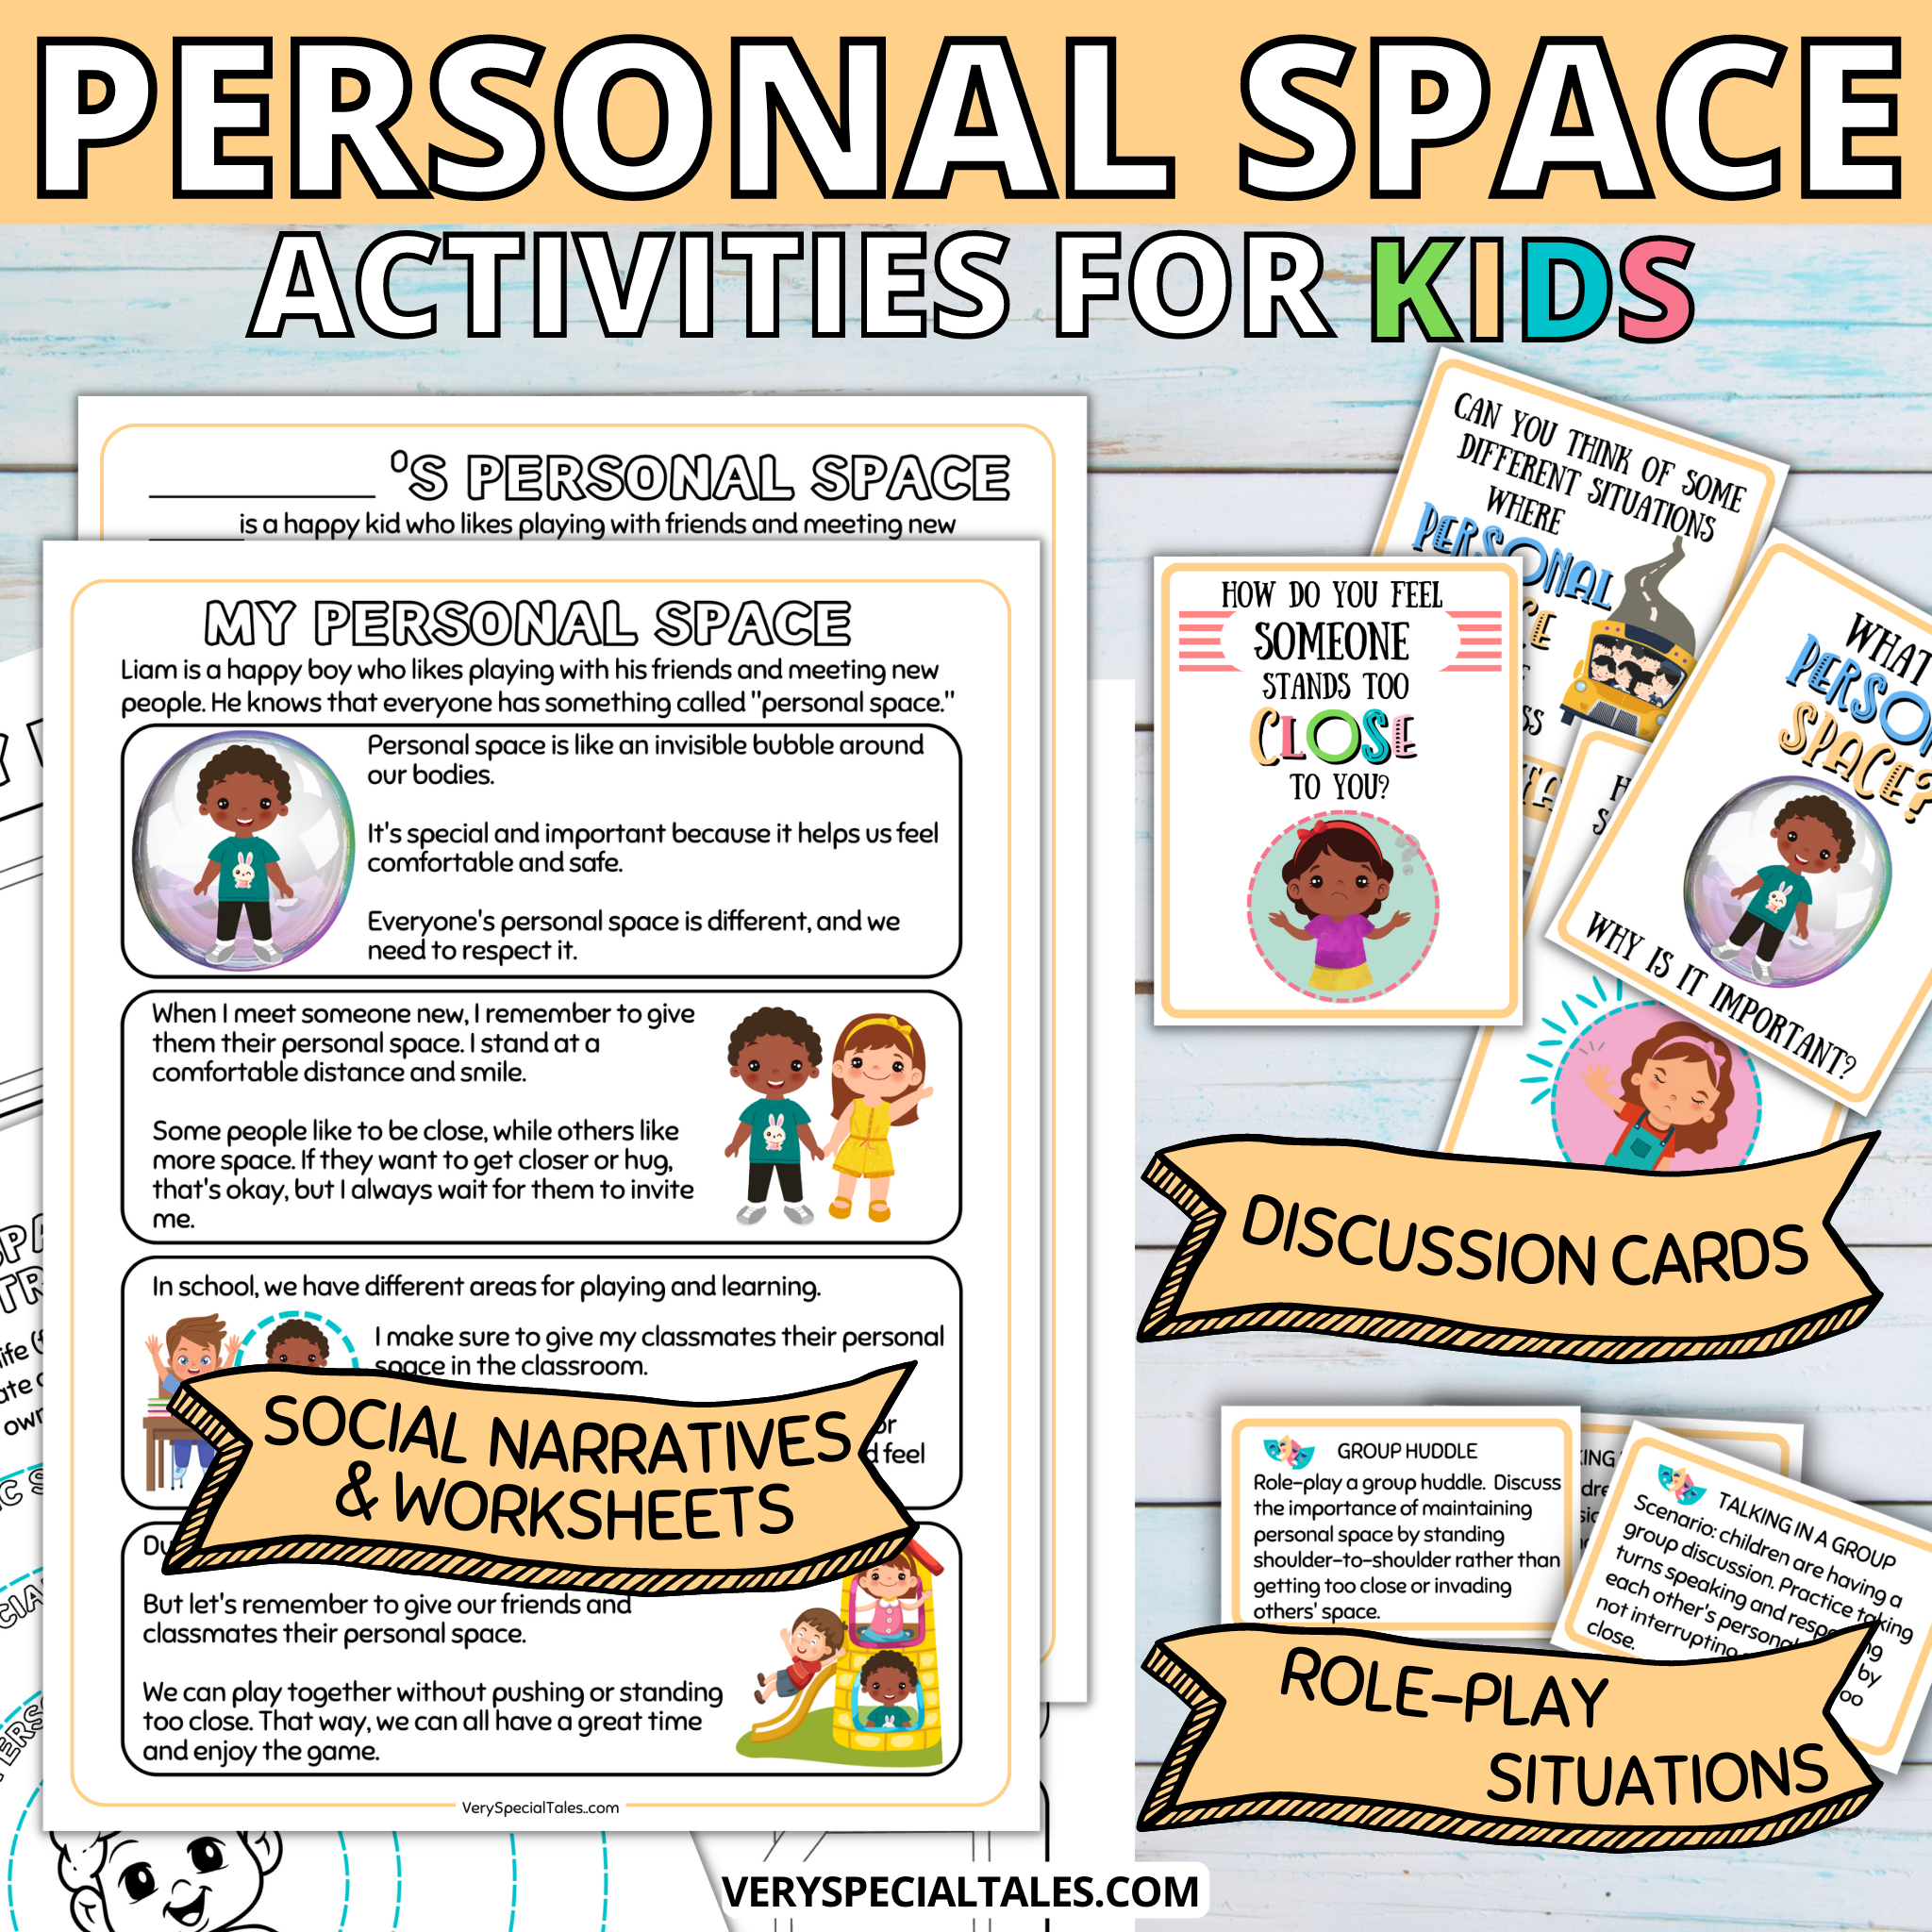 Personal Space Activities for Kids